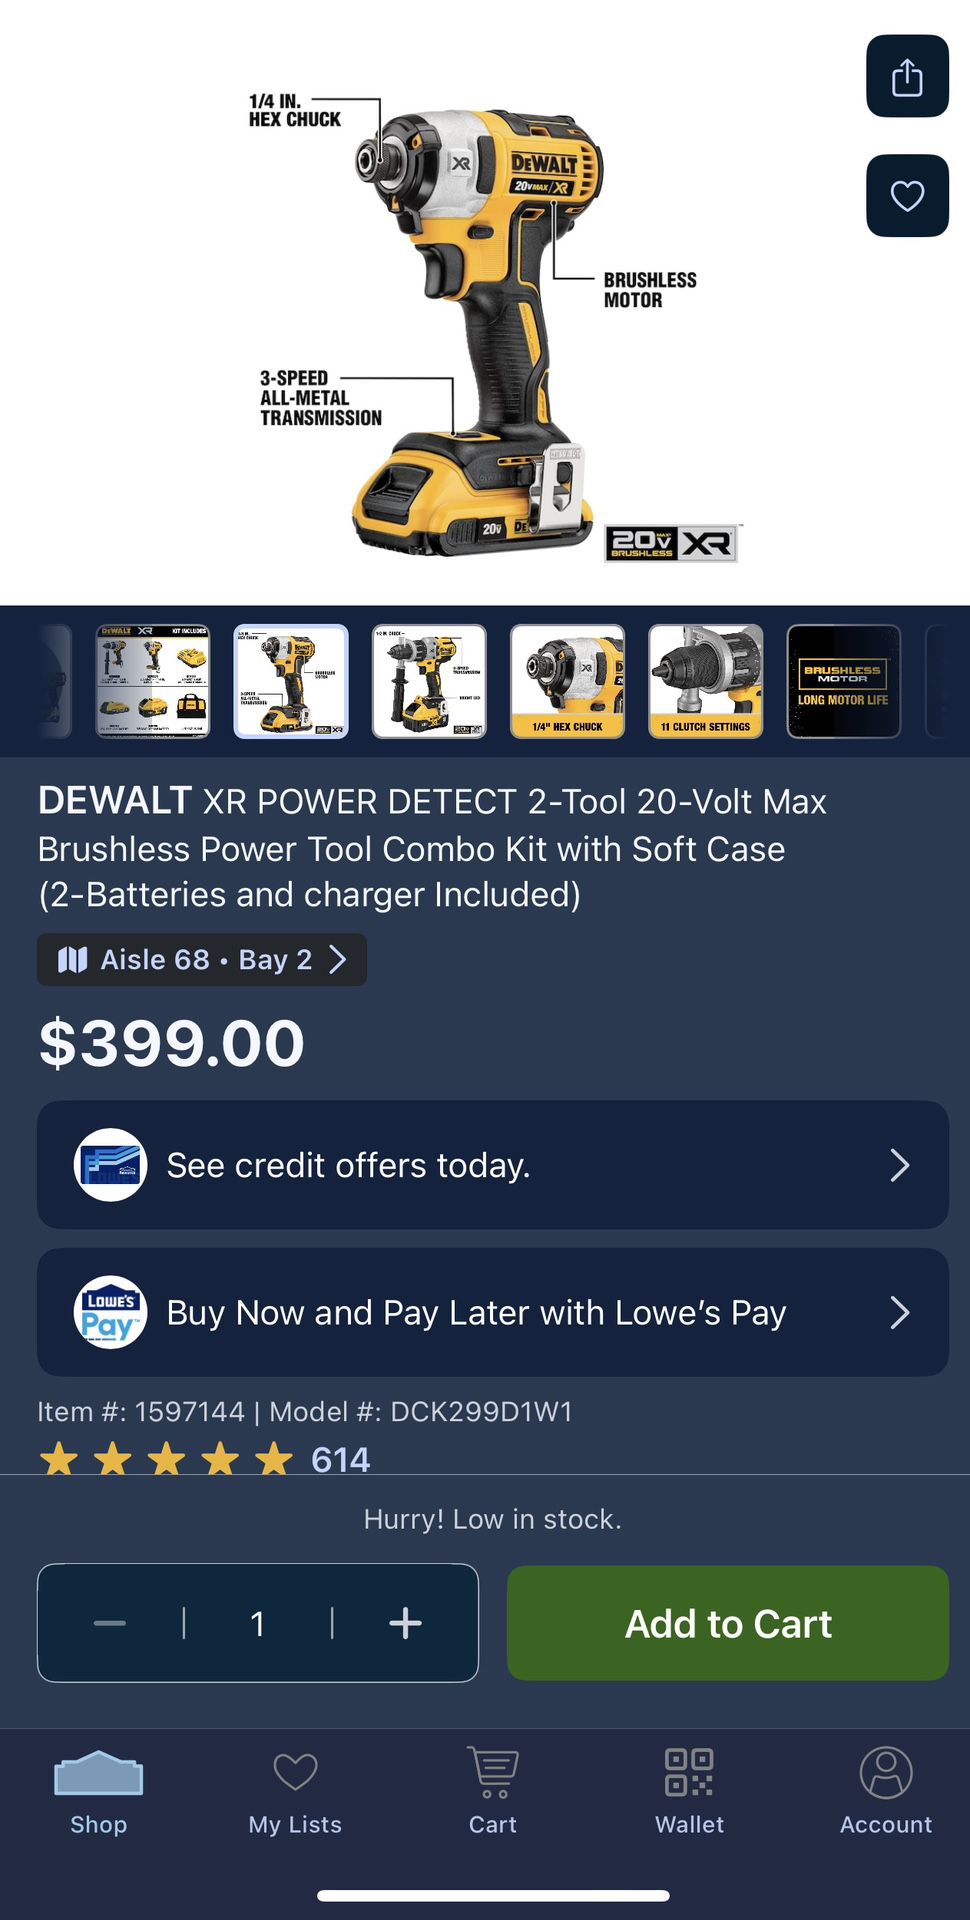 DEWALT Power Detect 2-Tool 20-Volt Max Brushless Power Tool Combo Kit with Soft Case with 2 Batteries & Charger